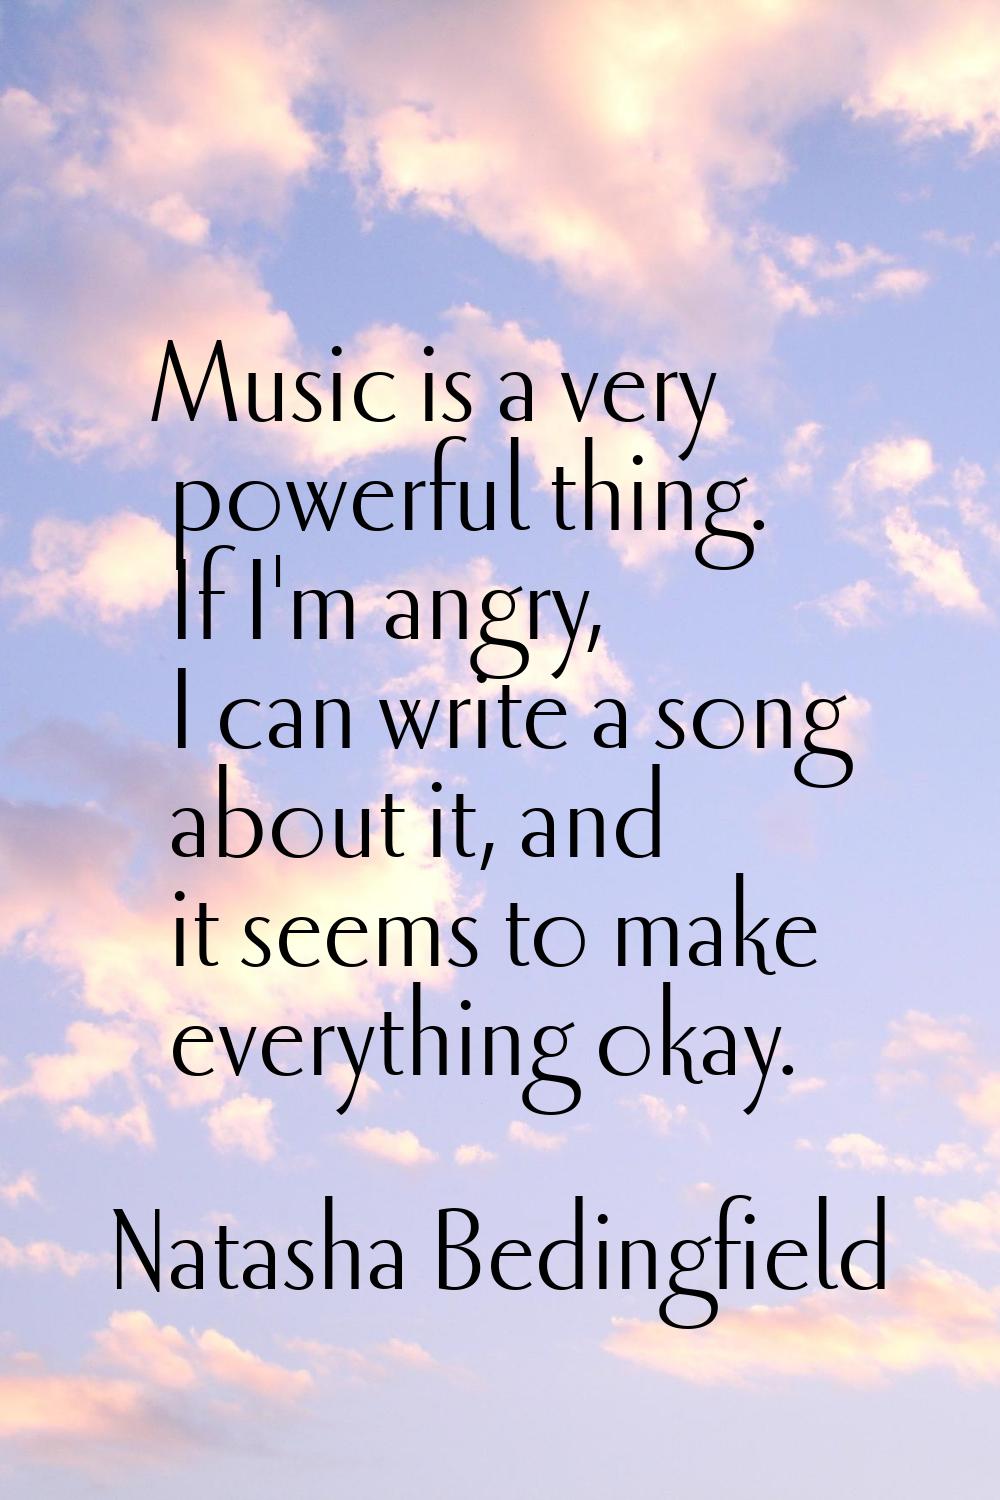 Music is a very powerful thing. If I'm angry, I can write a song about it, and it seems to make eve